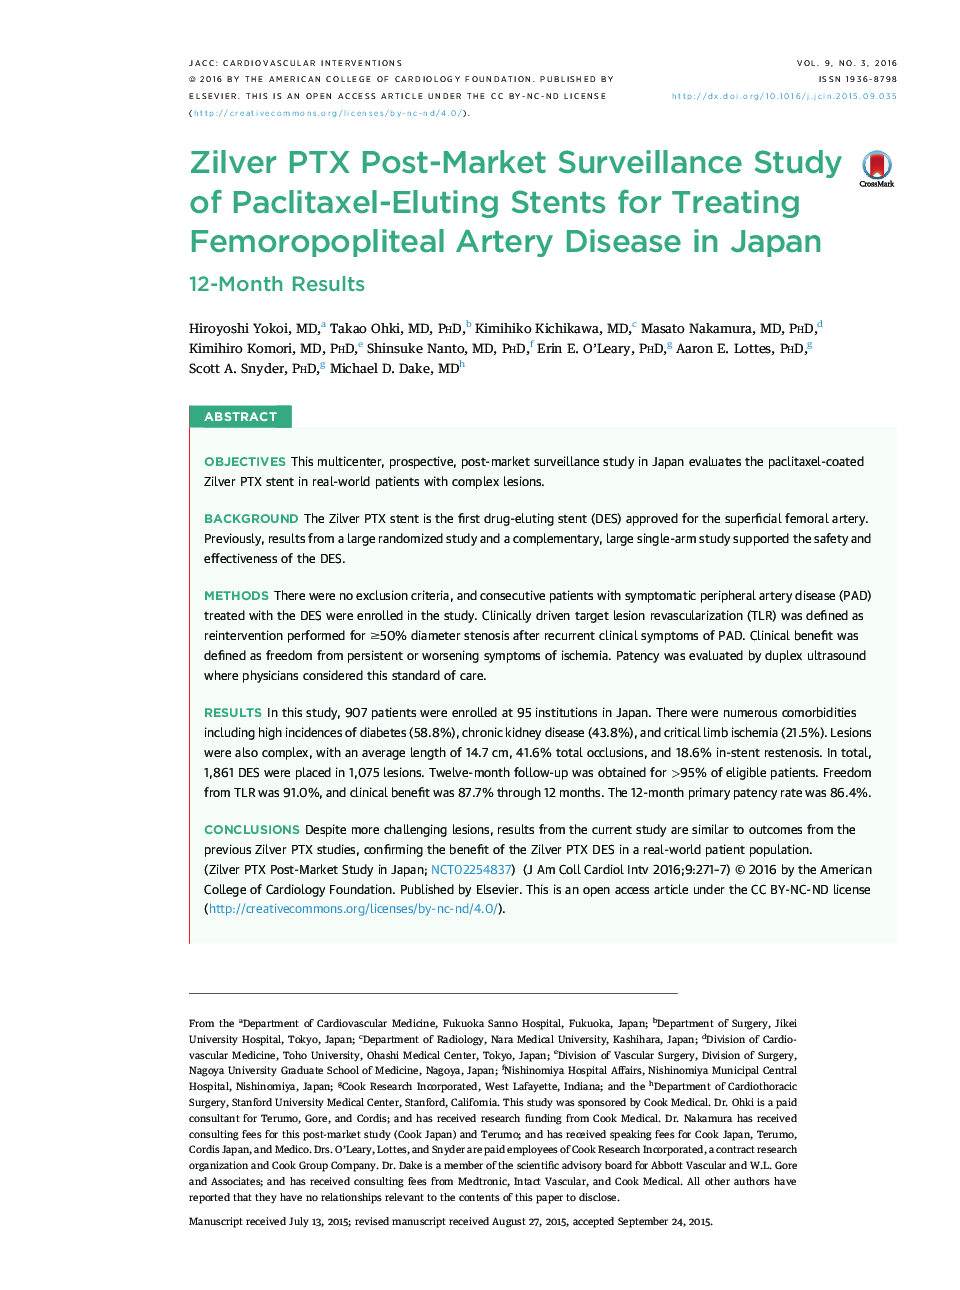 Zilver PTX Post-Market Surveillance Study of Paclitaxel-Eluting Stents for Treating Femoropopliteal Artery Disease in Japan: 12-Month Results